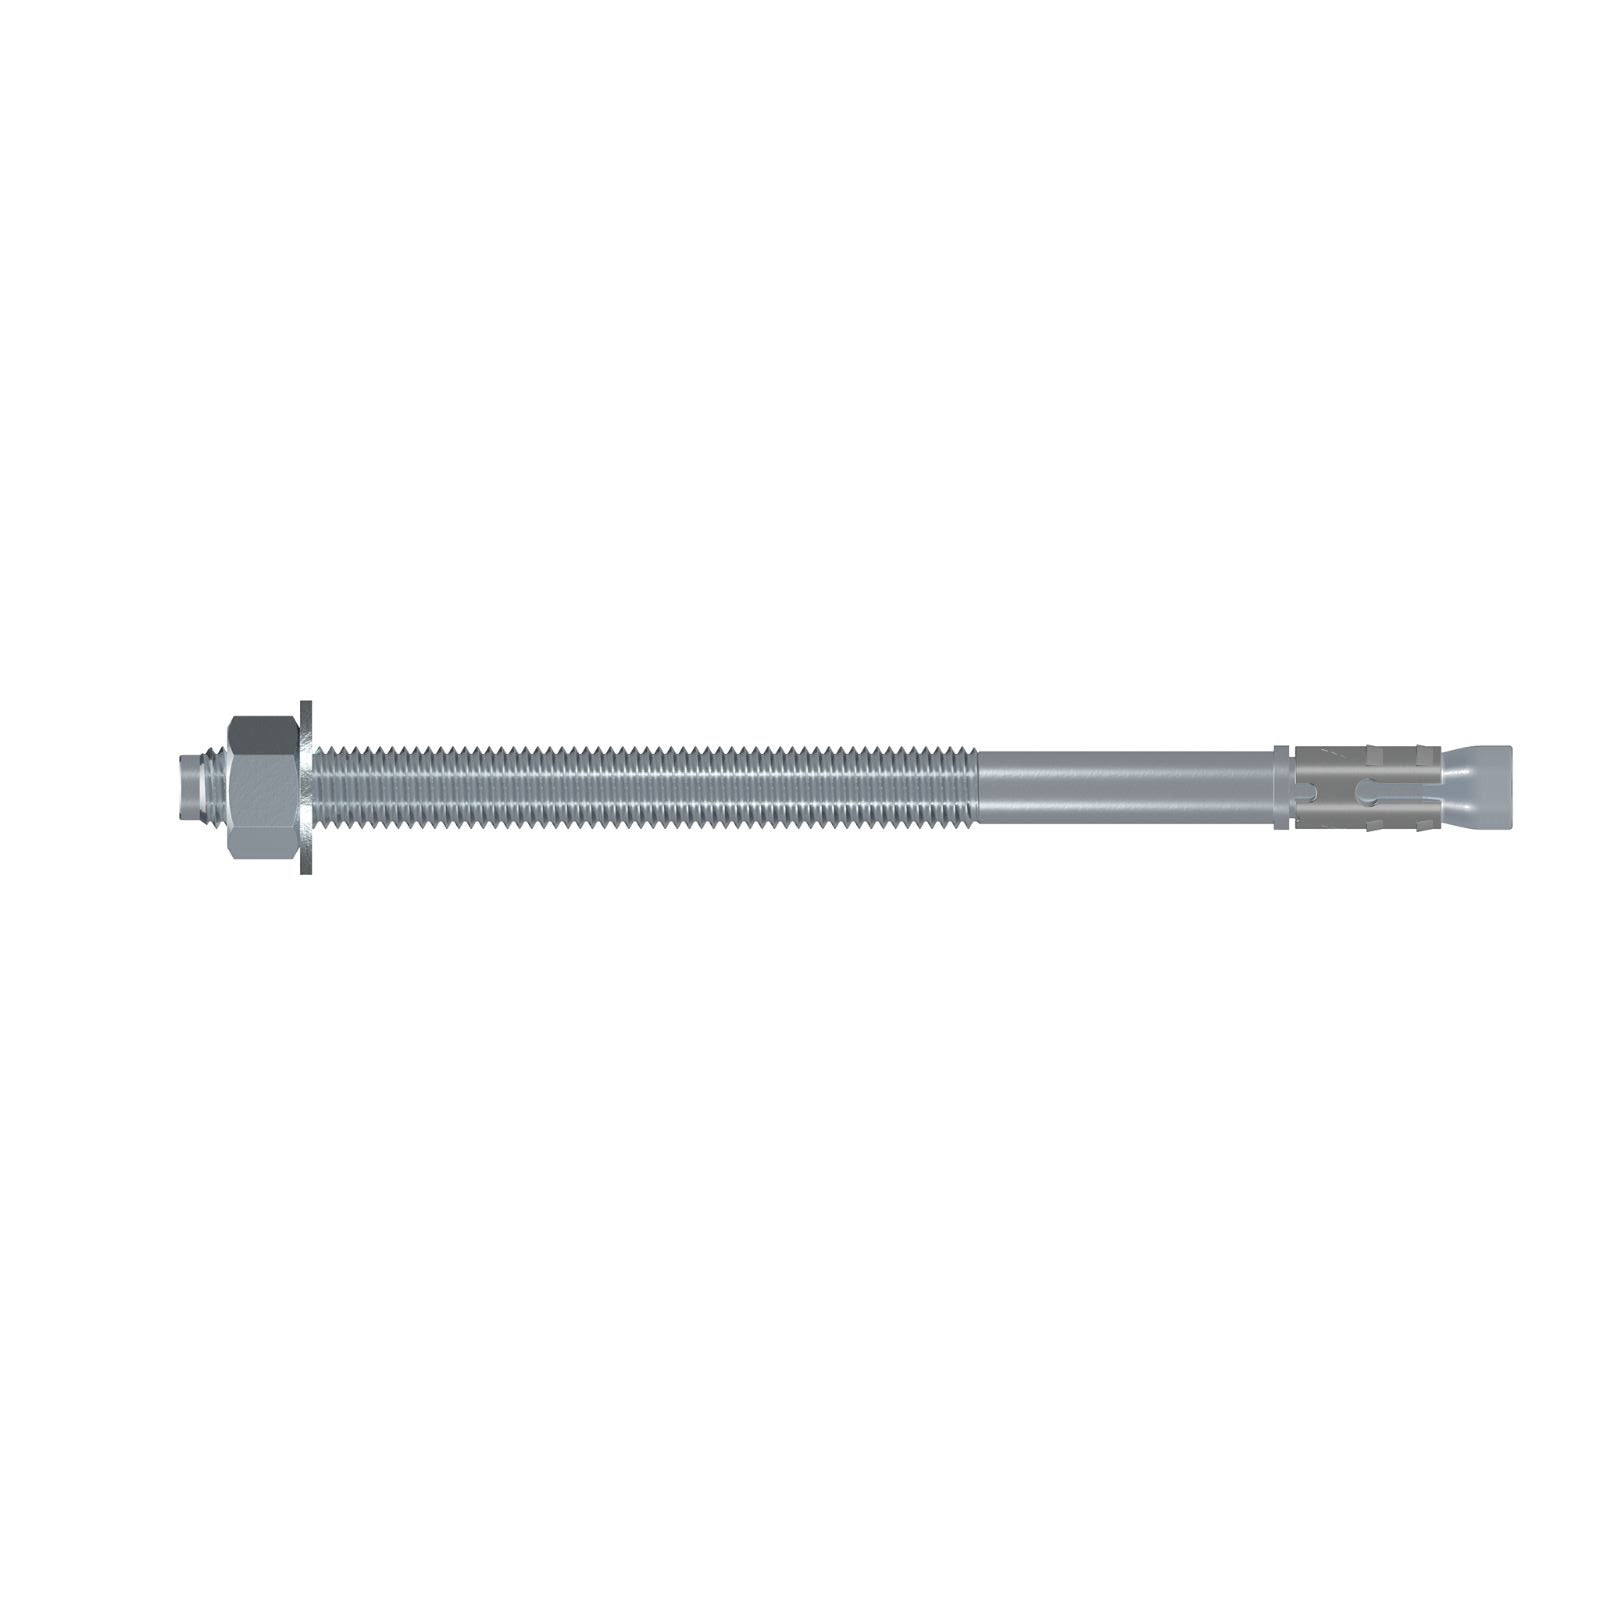 5/8" x 12" Strong-Tie Strong Bolt 2 Wedge Anchor, Zinc Plated, Pkg 4